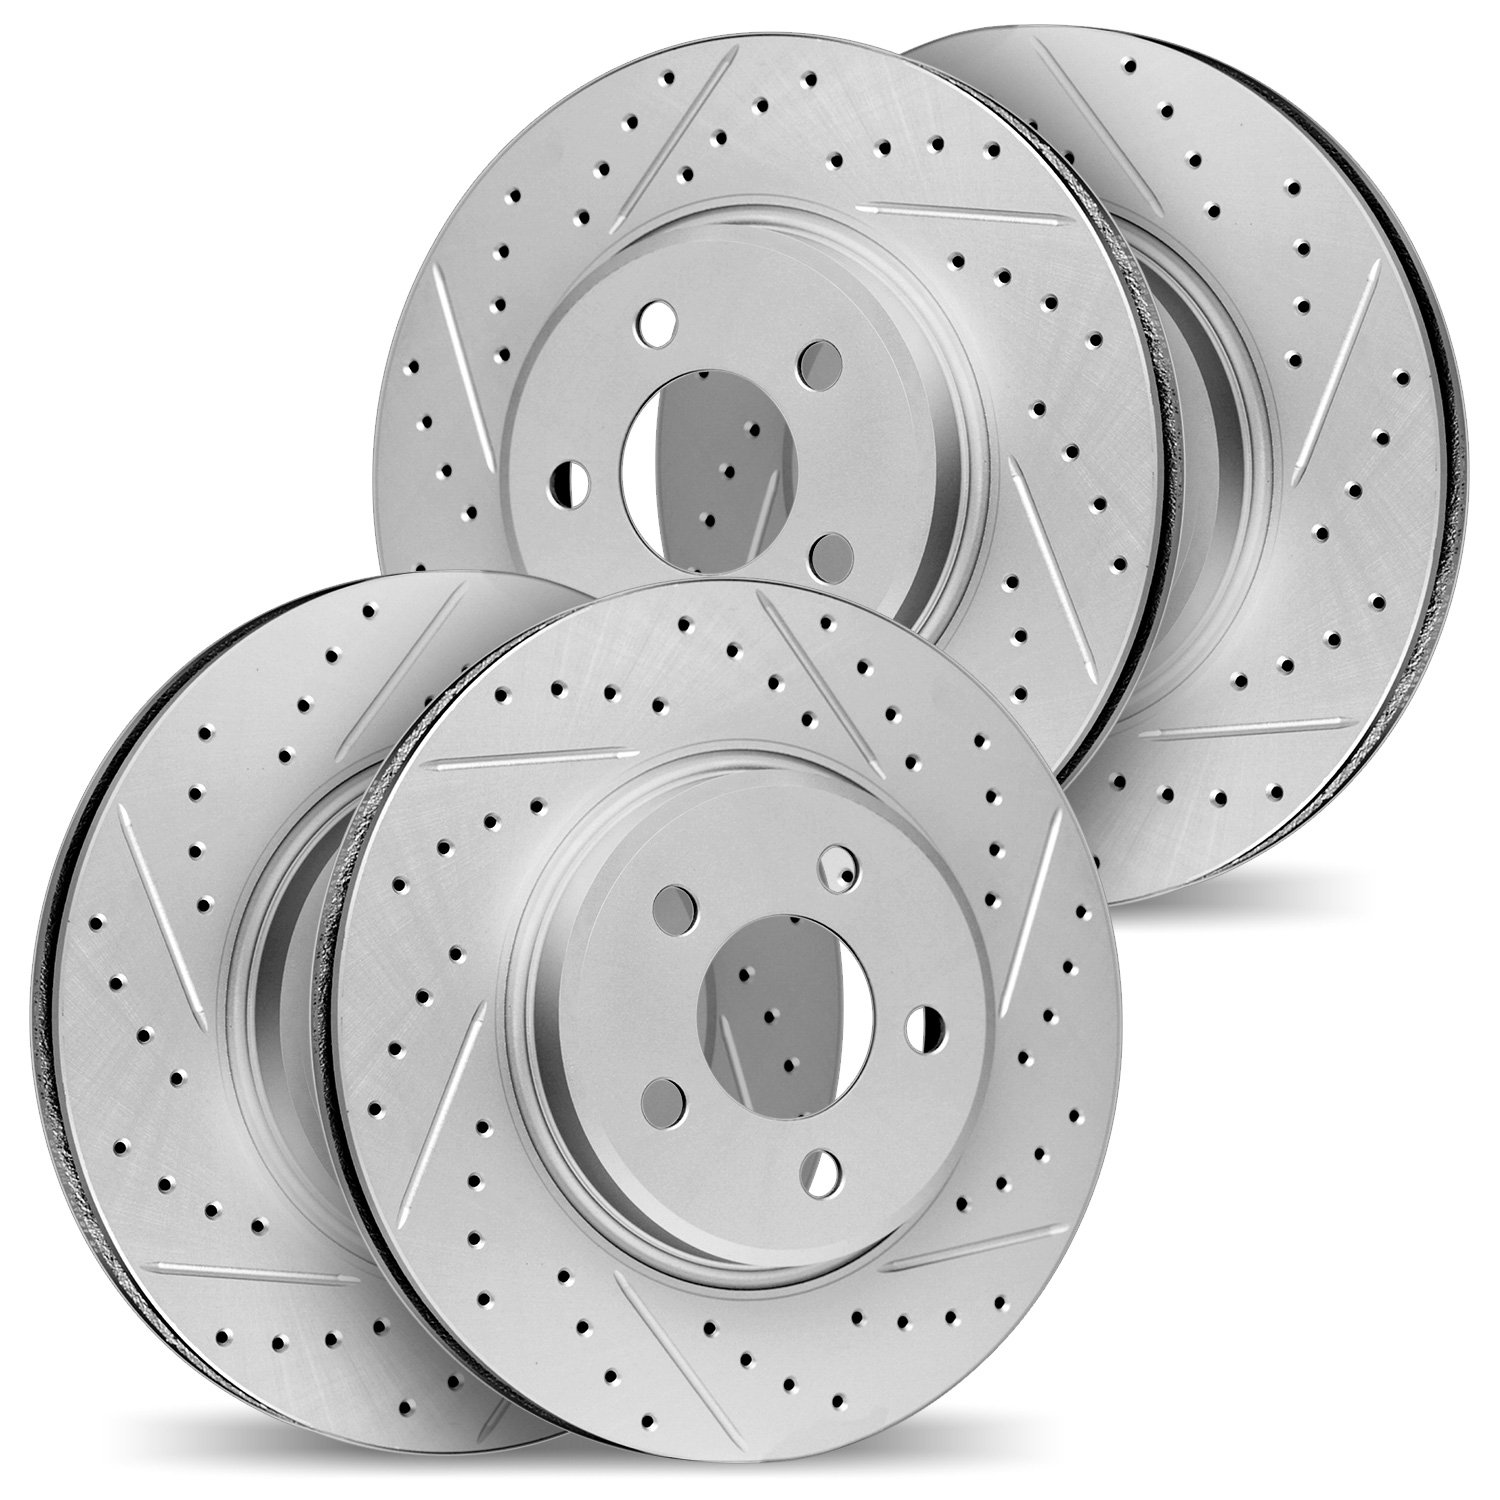 2004-21010 Geoperformance Drilled/Slotted Brake Rotors, 2003-2006 Kia/Hyundai/Genesis, Position: Front and Rear